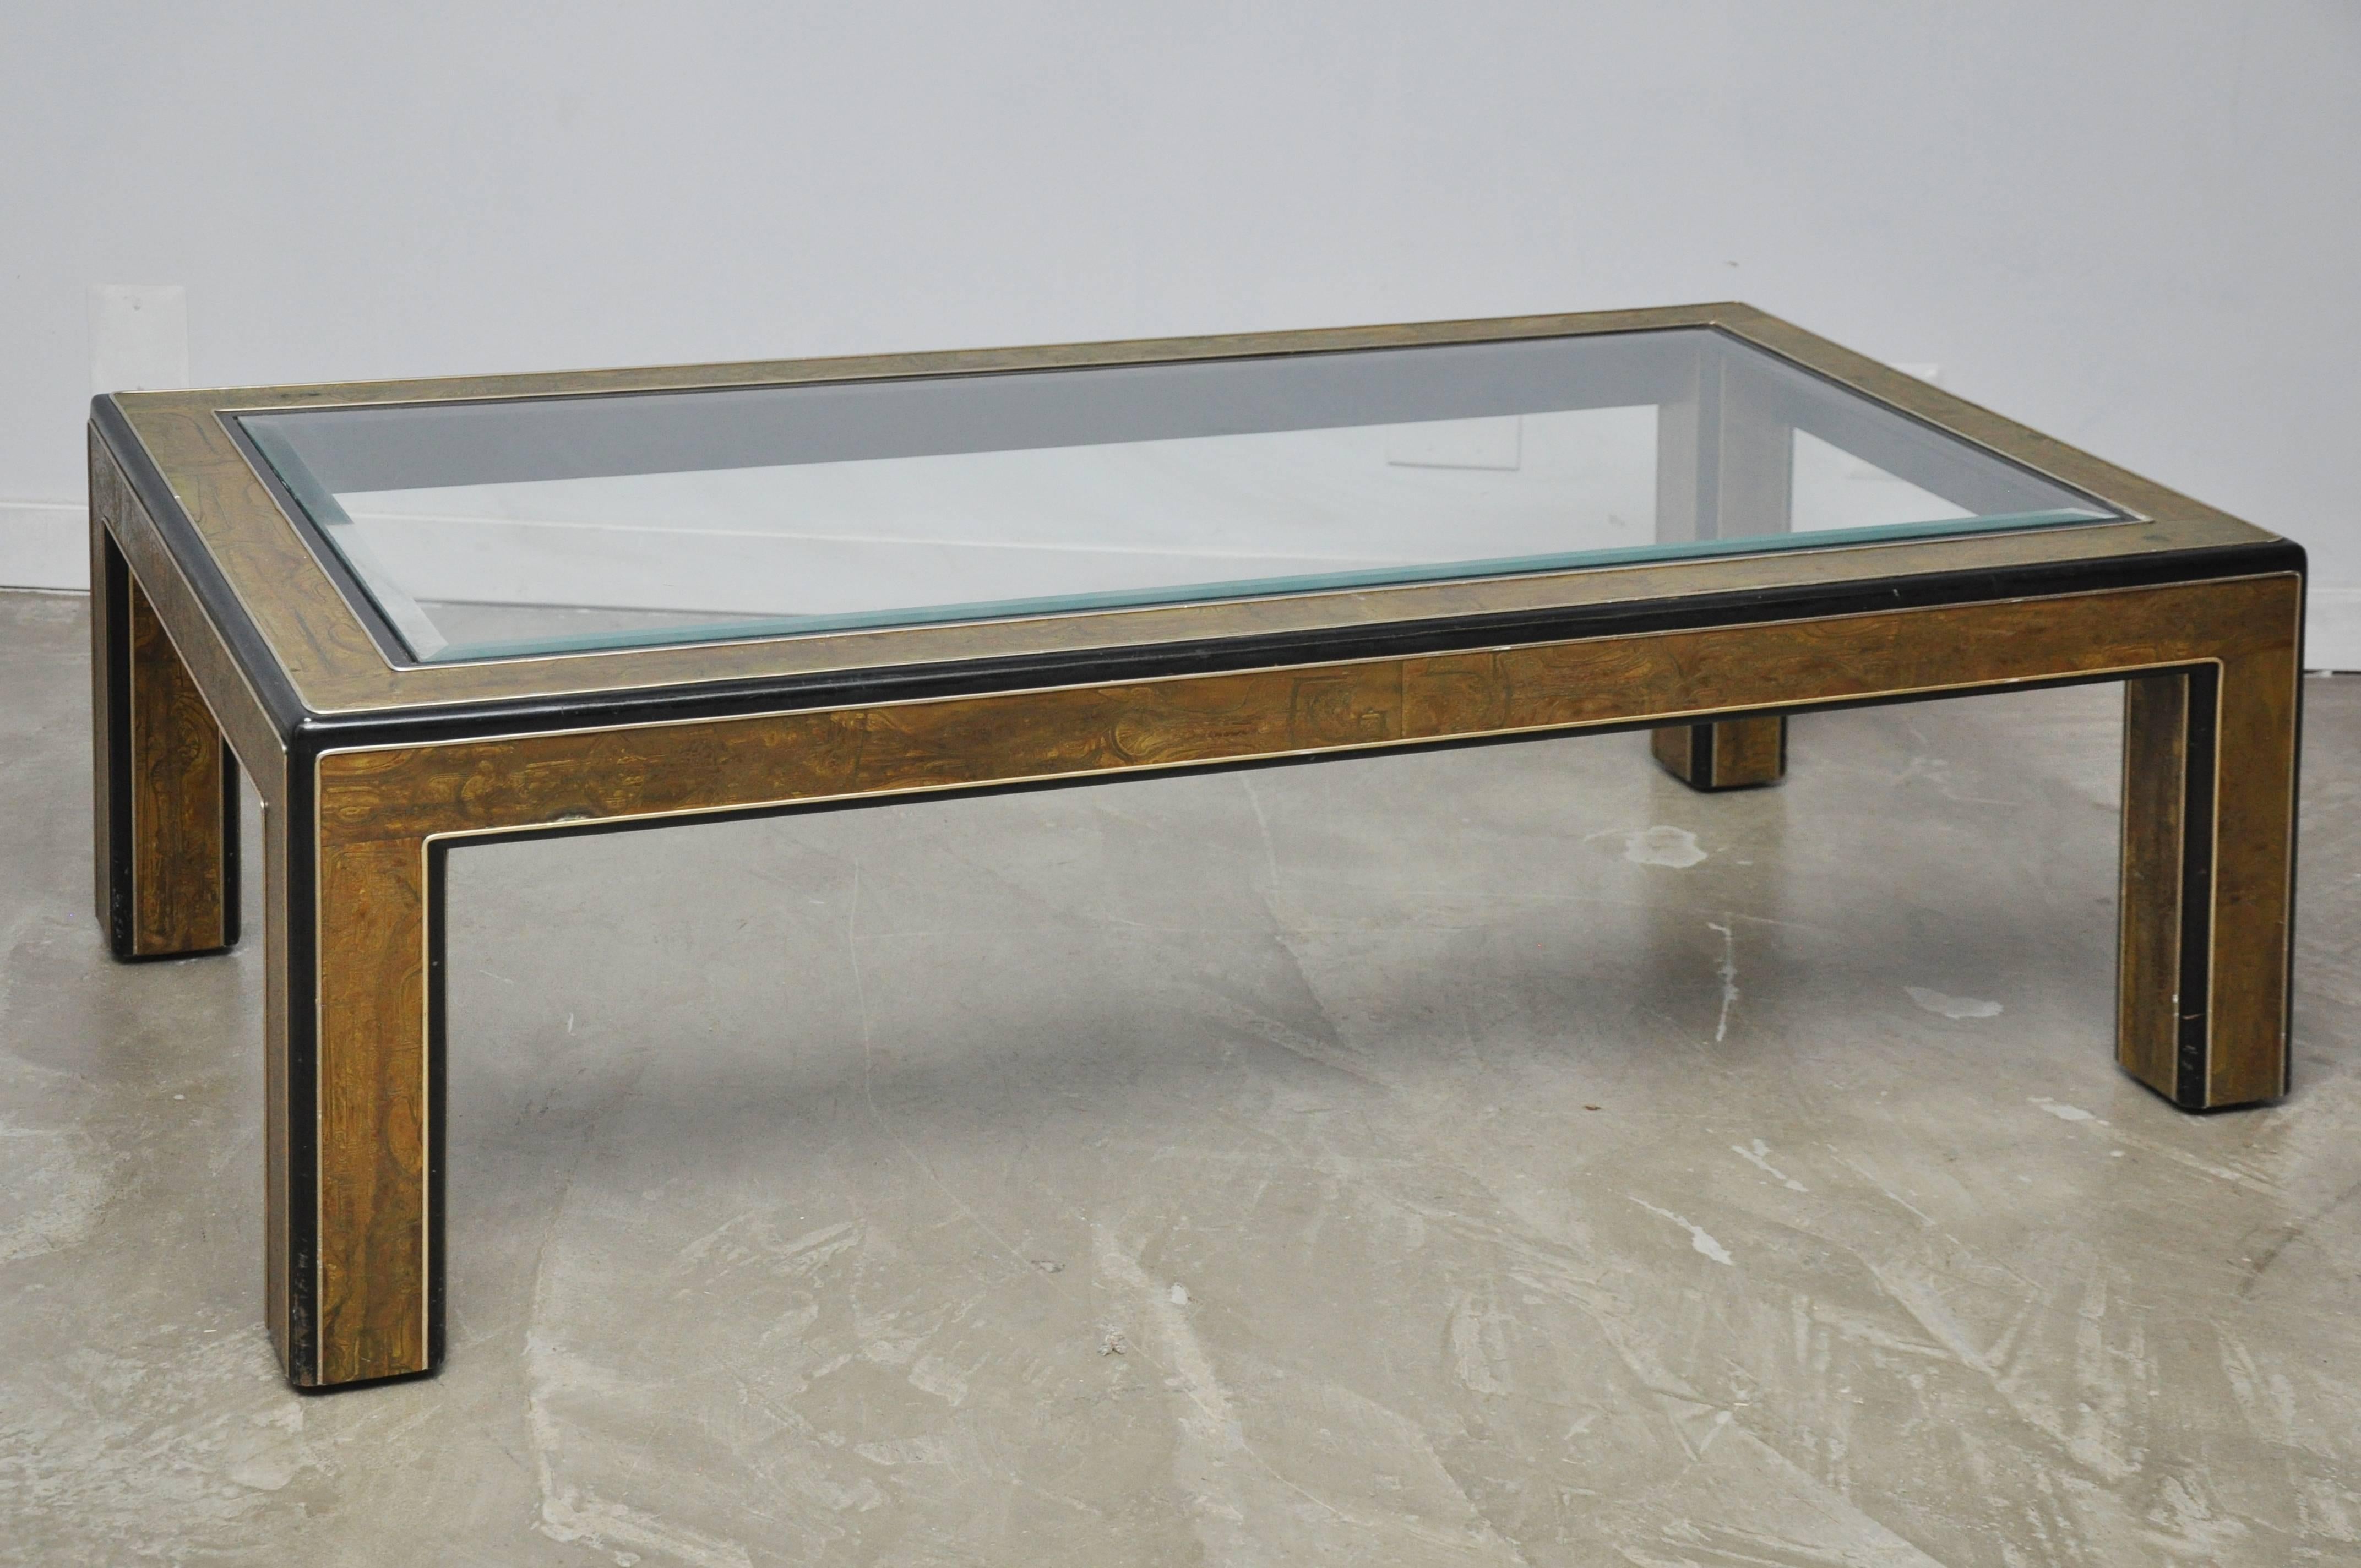 Acid etched brass coffee table by Bernhard Rohne for Mastercraft, circa 1970s.
   